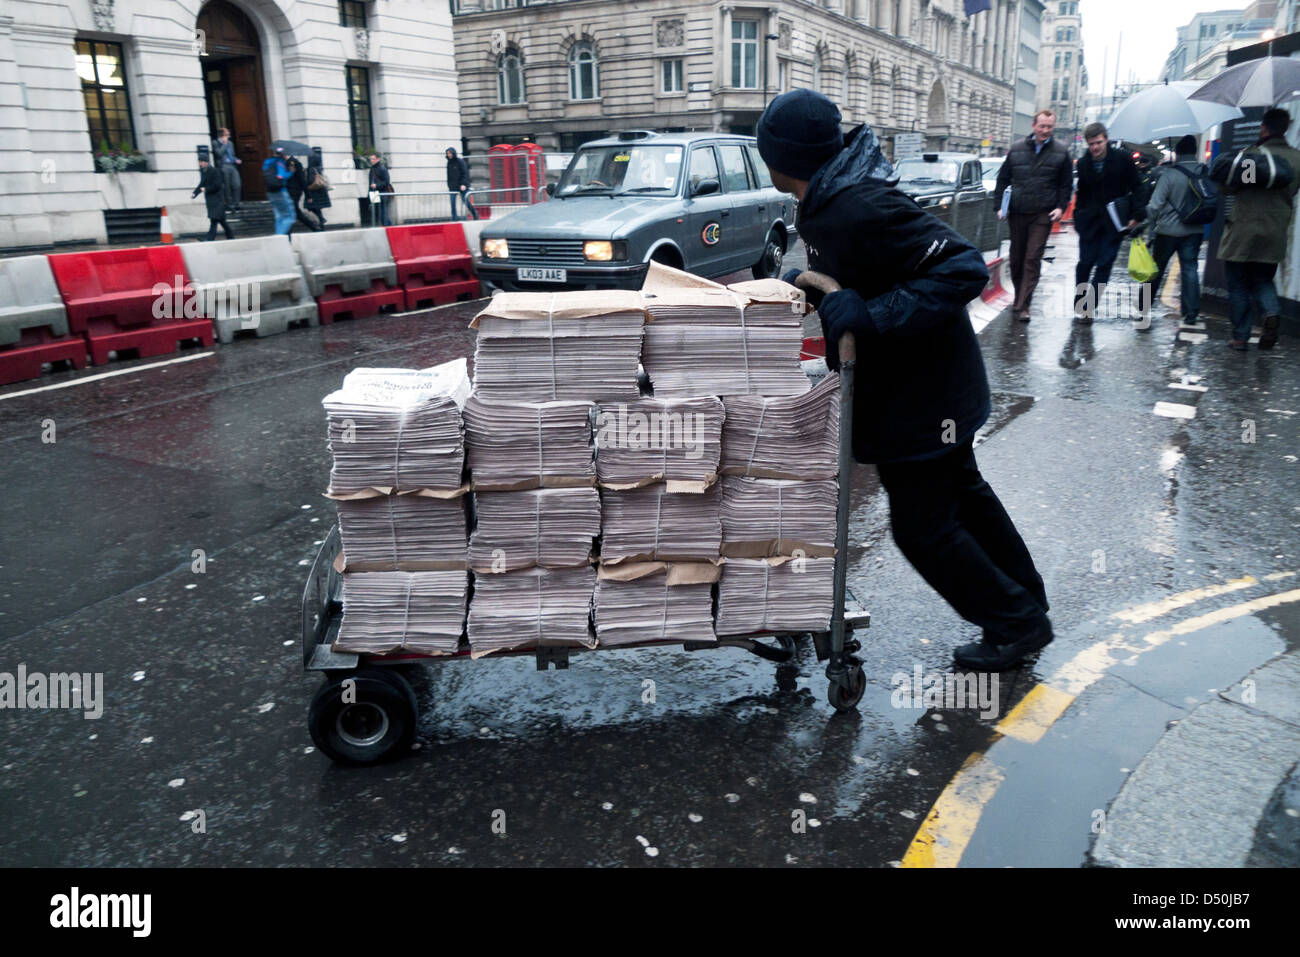 A newspaper seller worker delivering a stack of newspapers in rain to a newsstand in Moorgate  London England UK    KATHY DEWITT Stock Photo